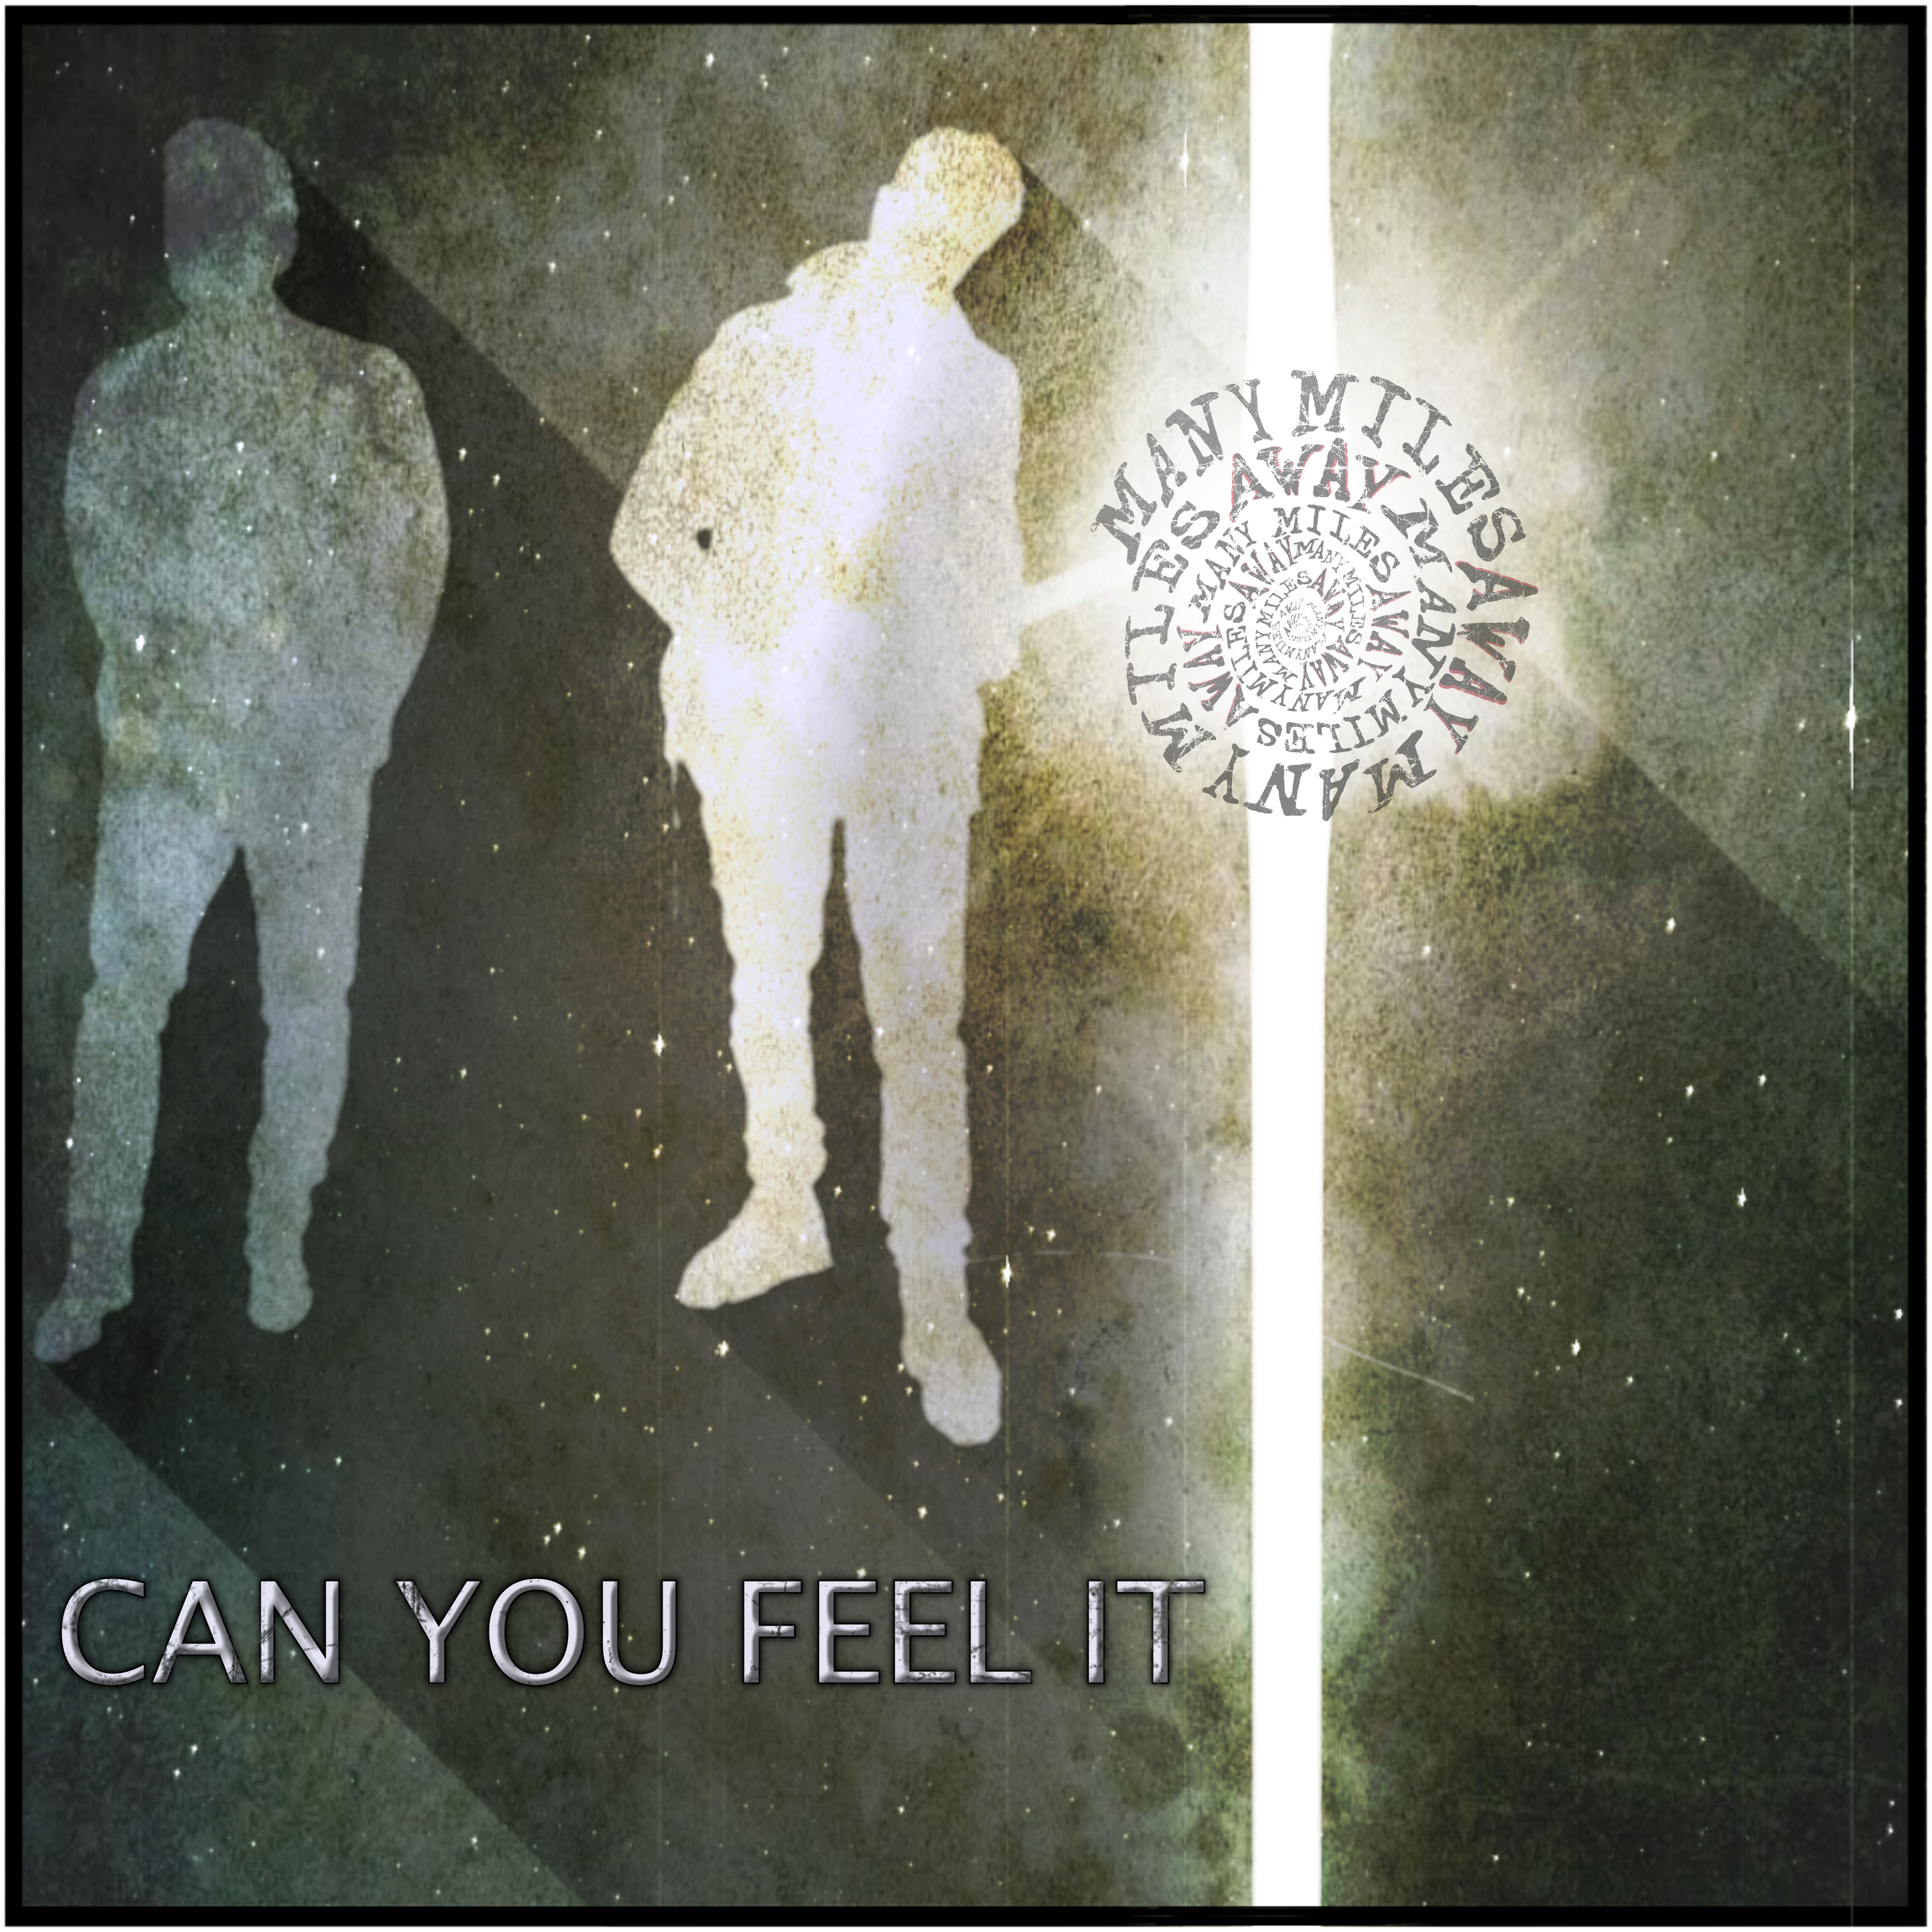 Many Miles Away To Release Highly Anticipated Debut Single "Can You Feel It" On Tuesday January 24th, 2023 